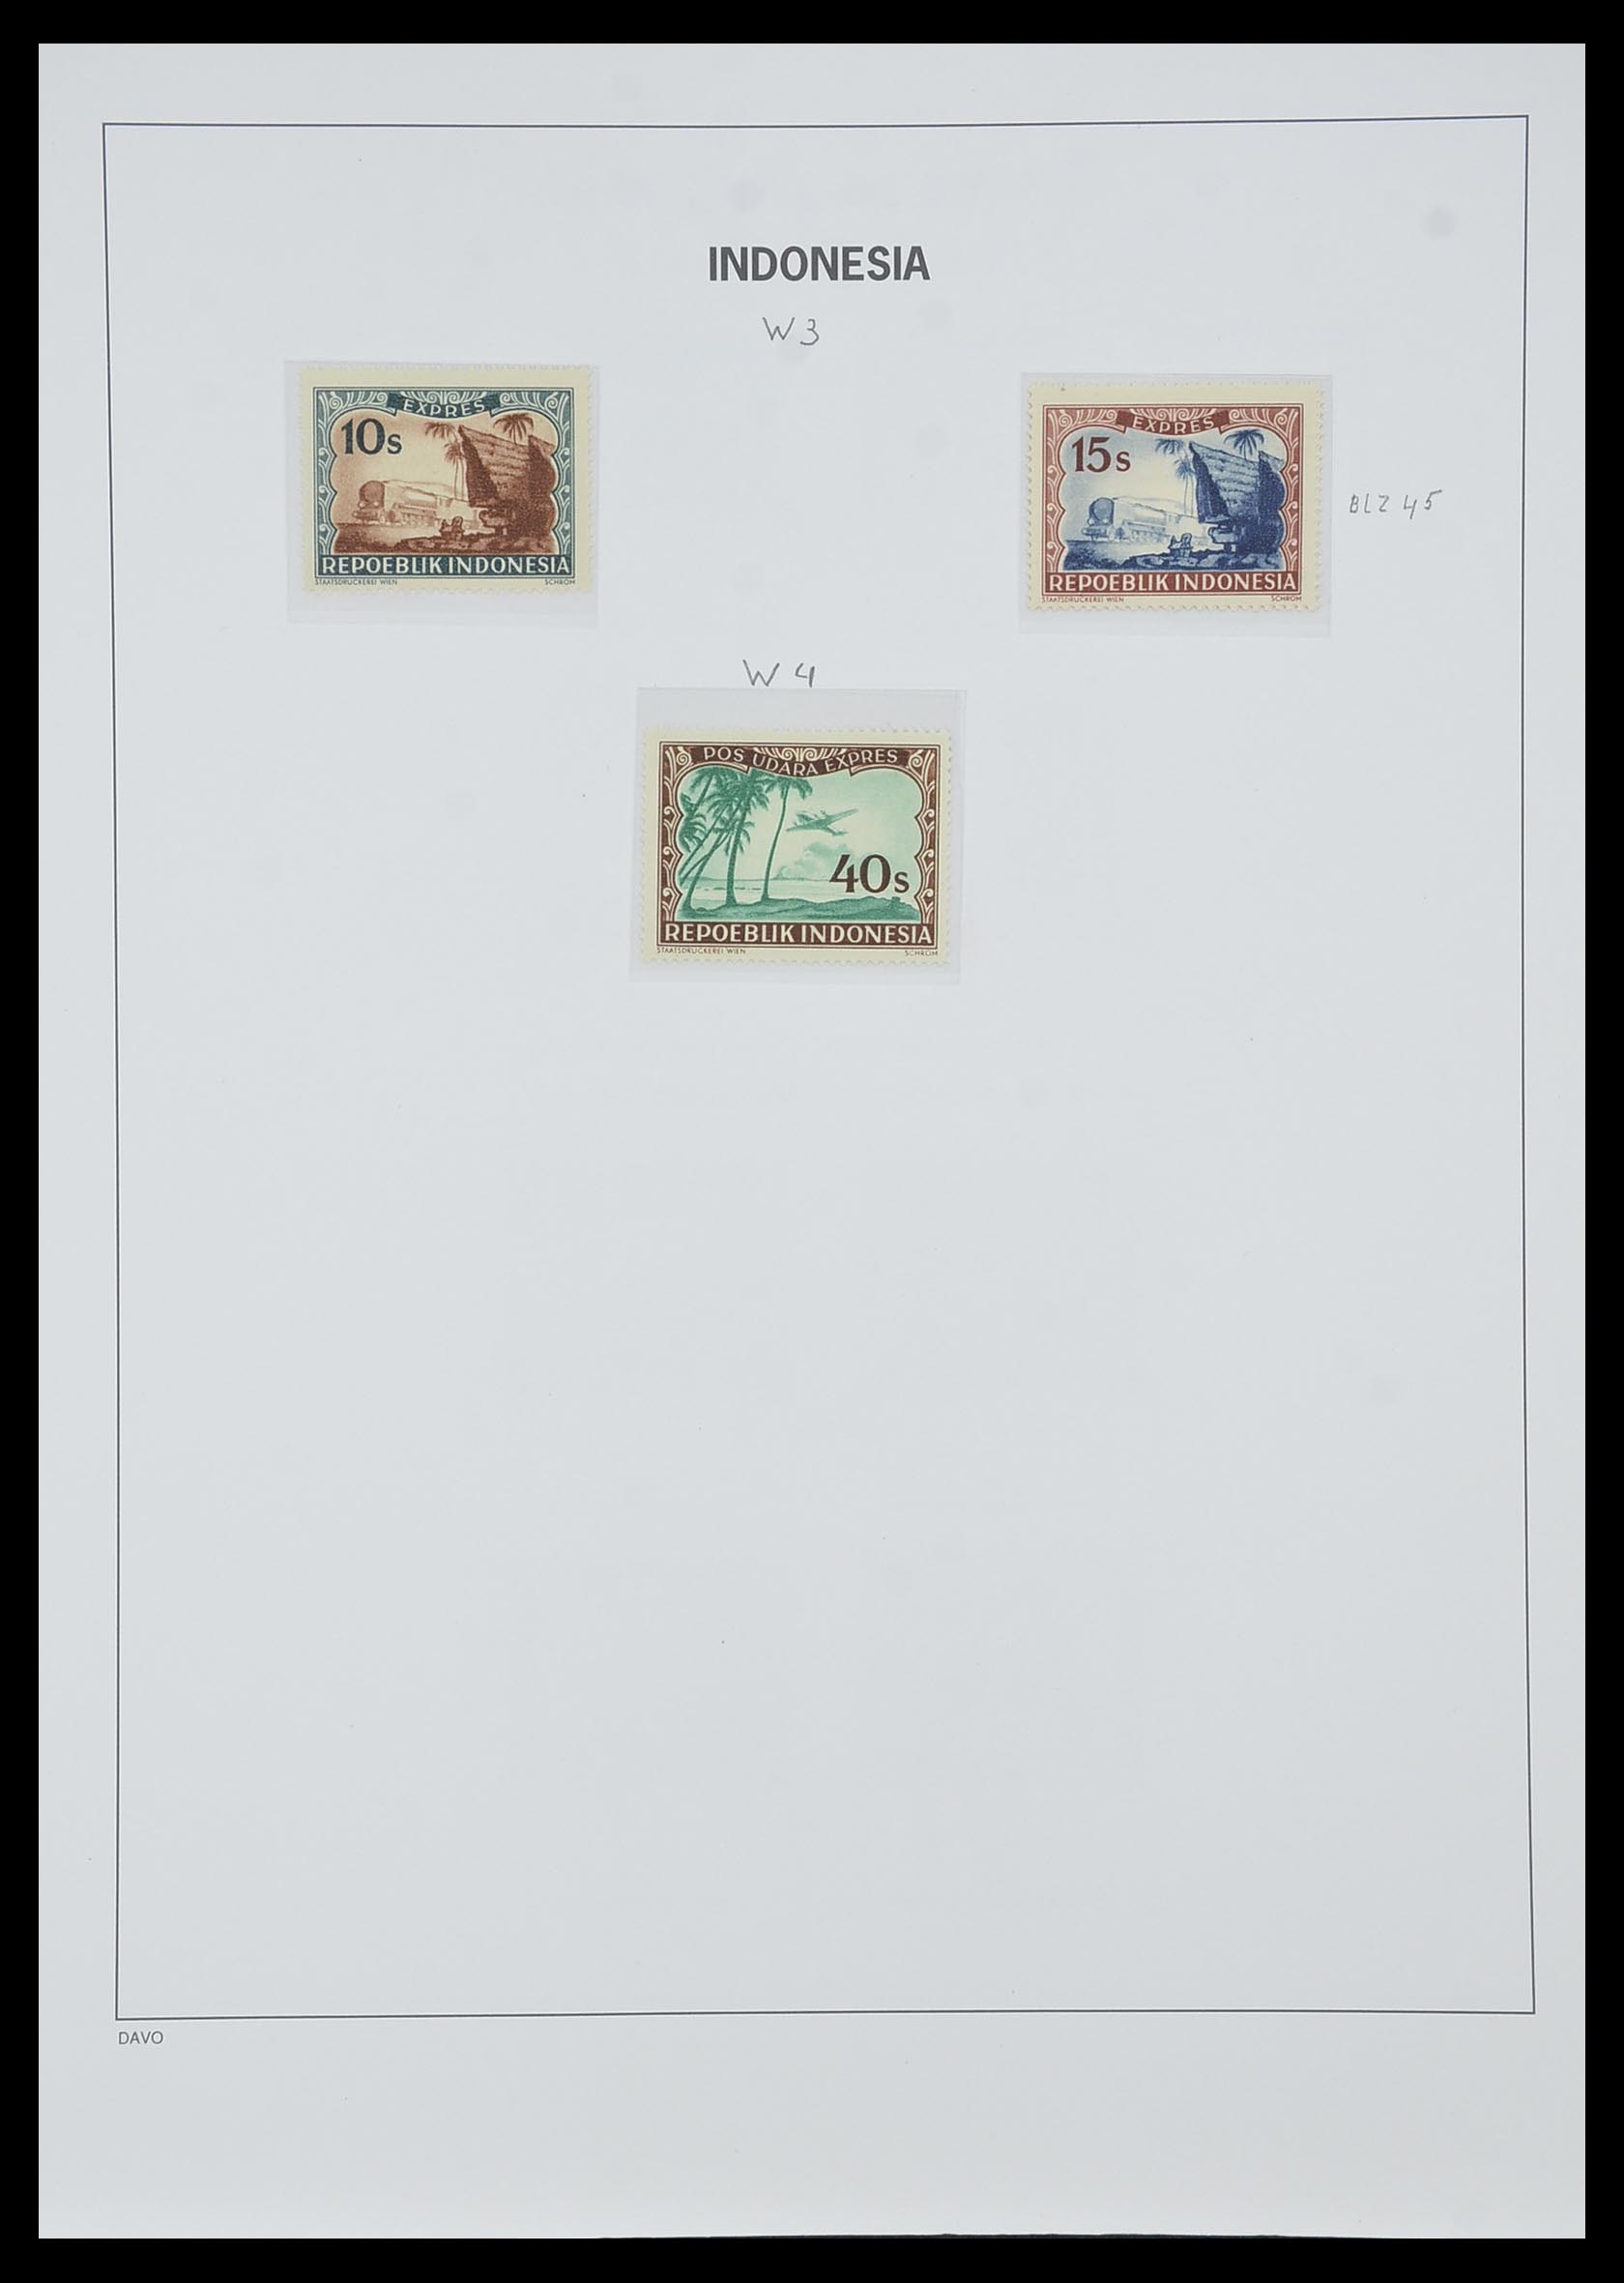 33988 013 - Stamp collection 33988 Vienna printings Indonesia.